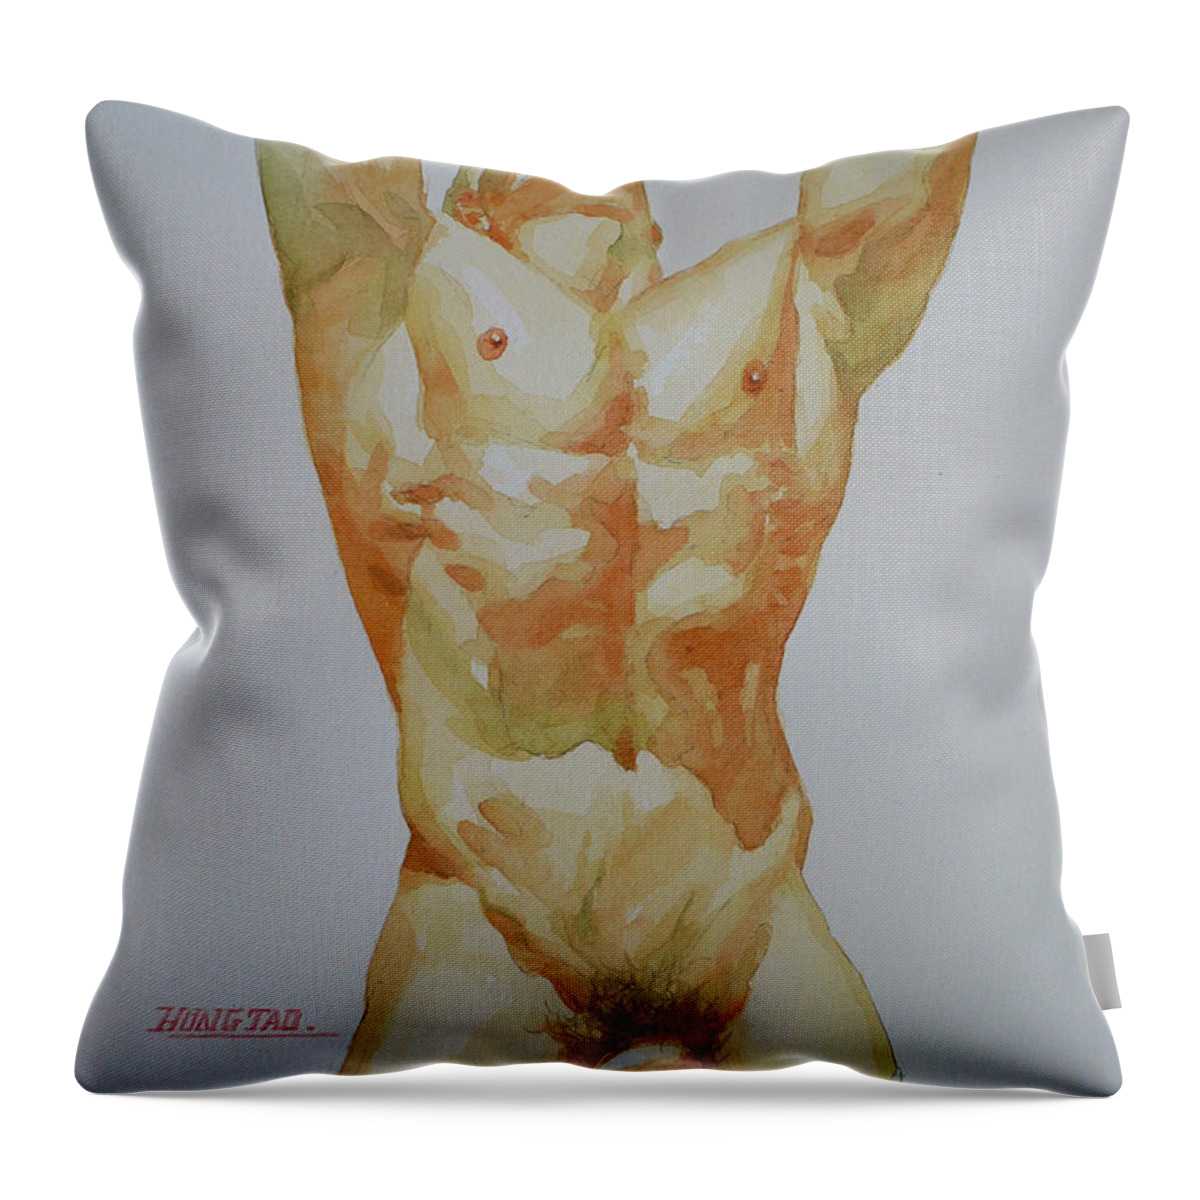 Original Art Throw Pillow featuring the painting Original Watercolor Painting Art Male Nude Men Gay Interest On Paper #12-30-02 by Hongtao Huang